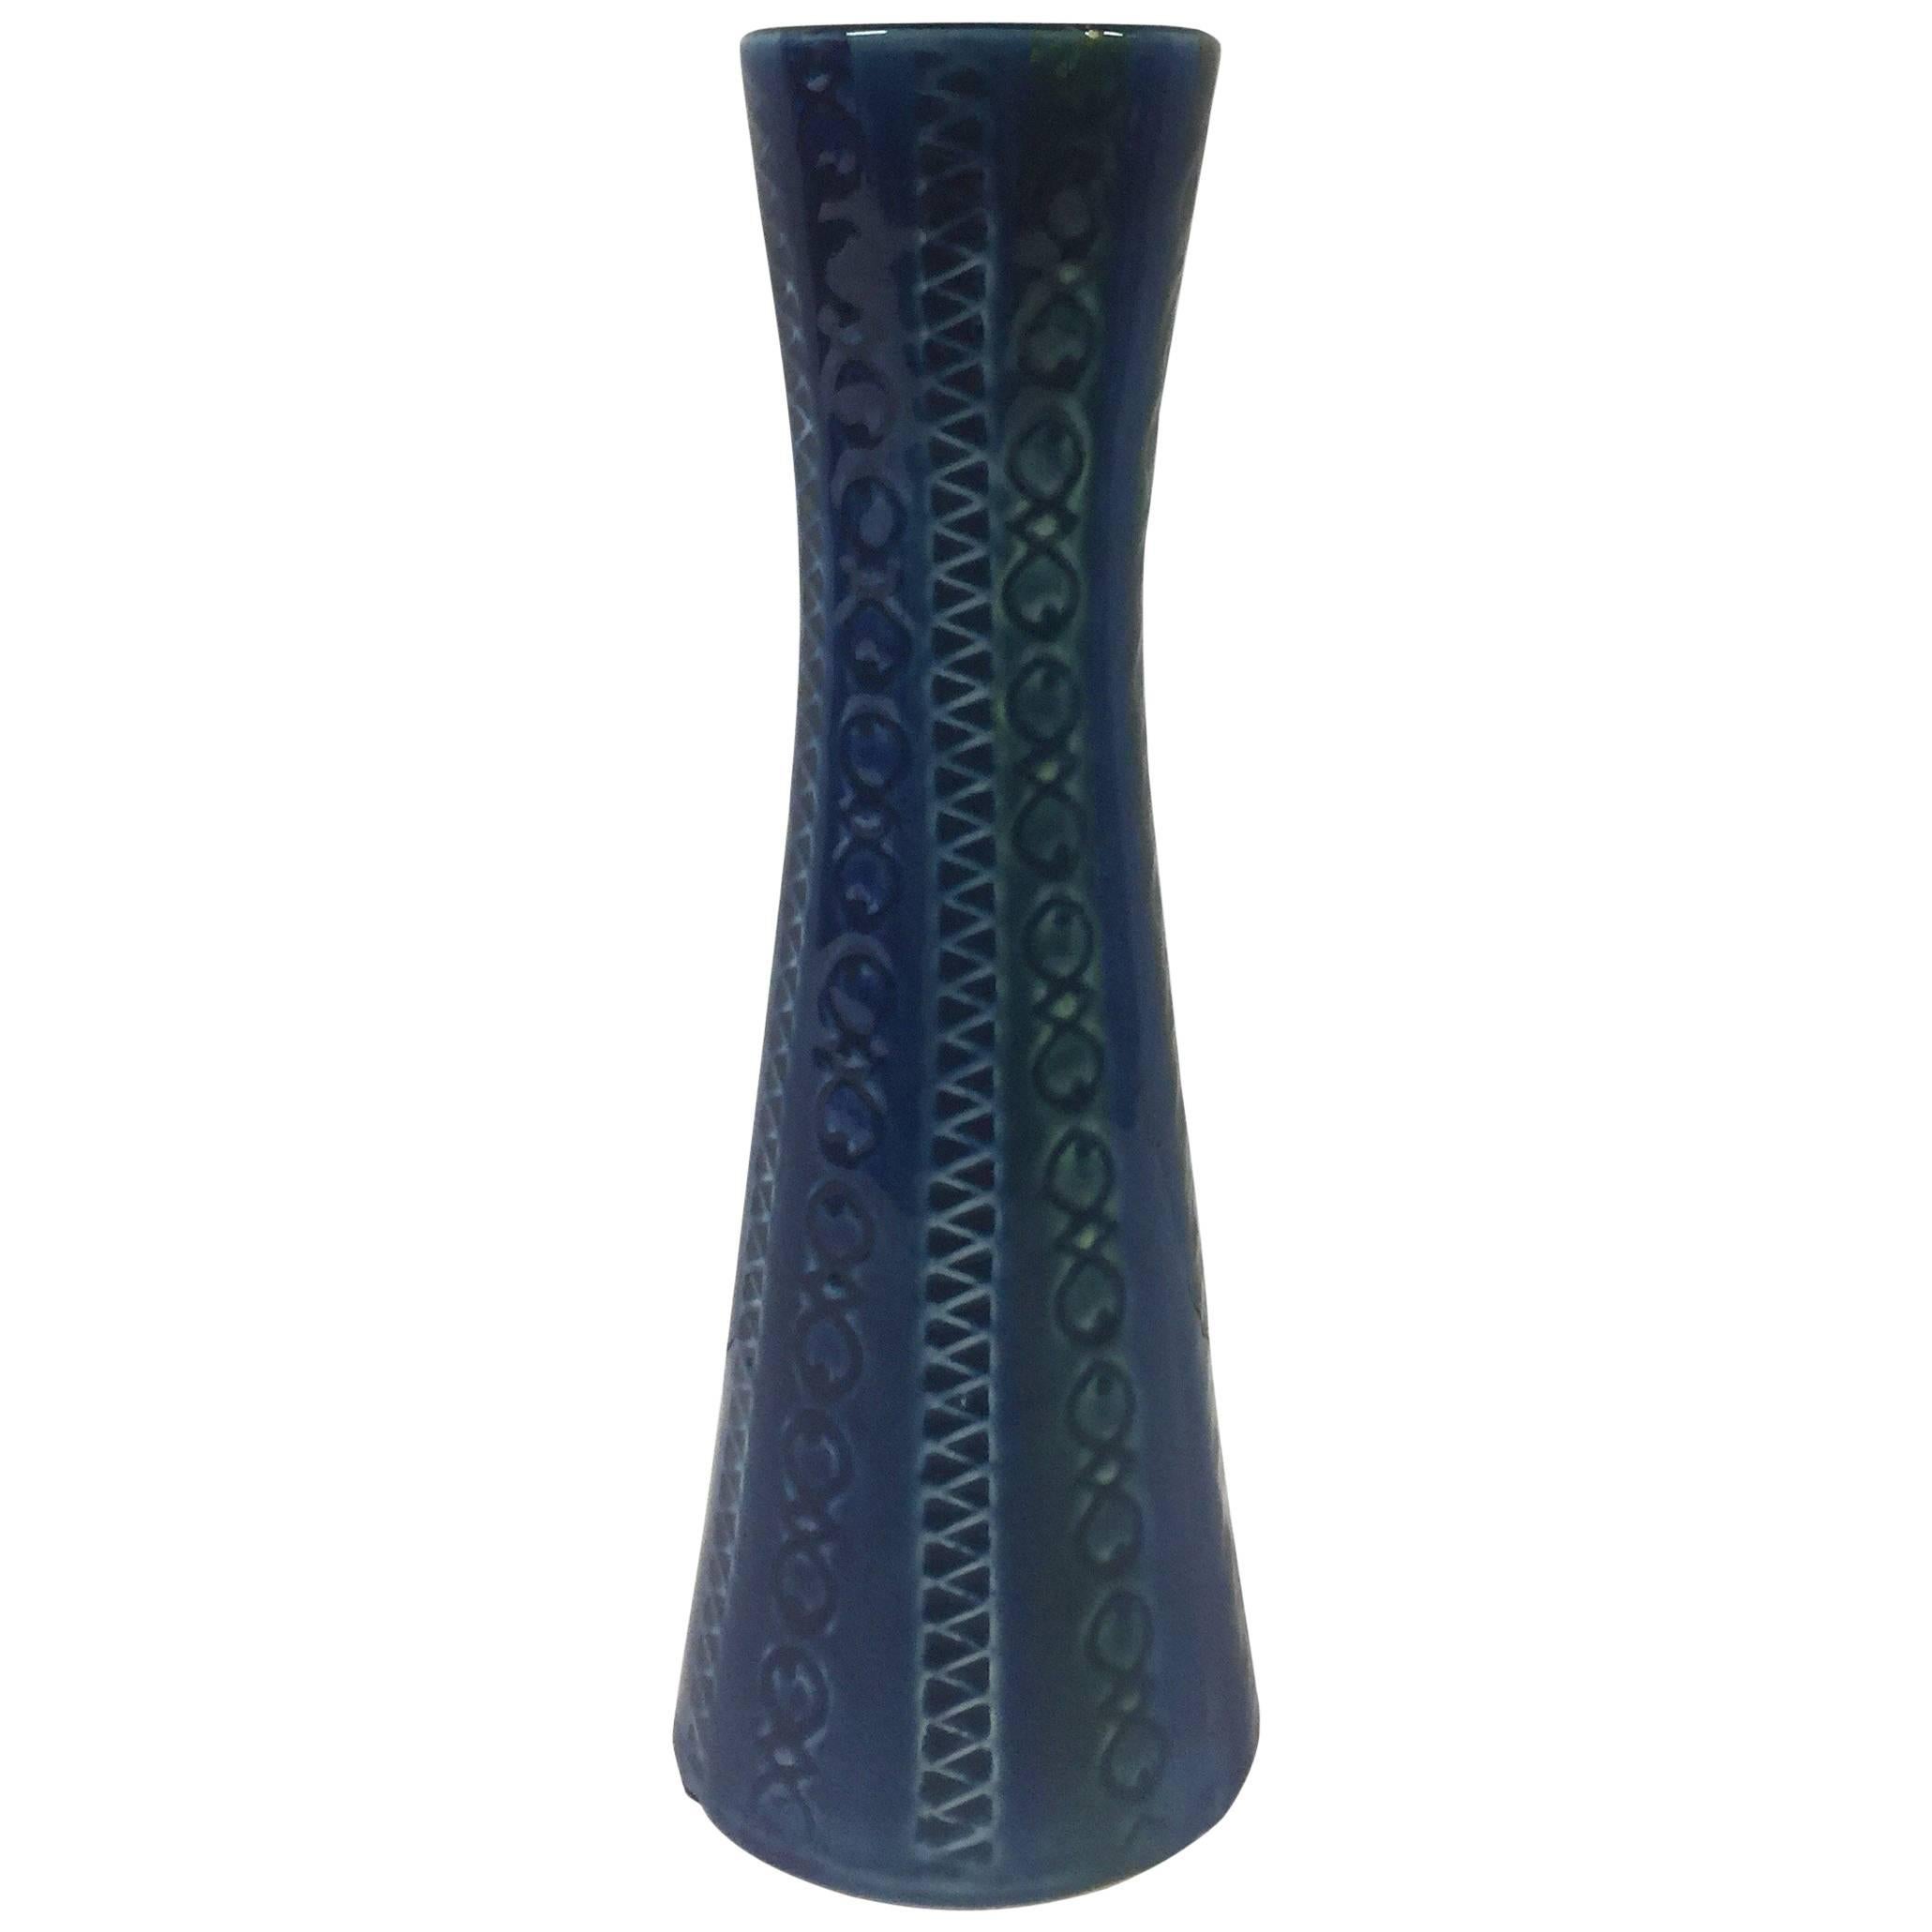 Blue and Black Sgrafitto Bud Vase by Bitossi for Raymor